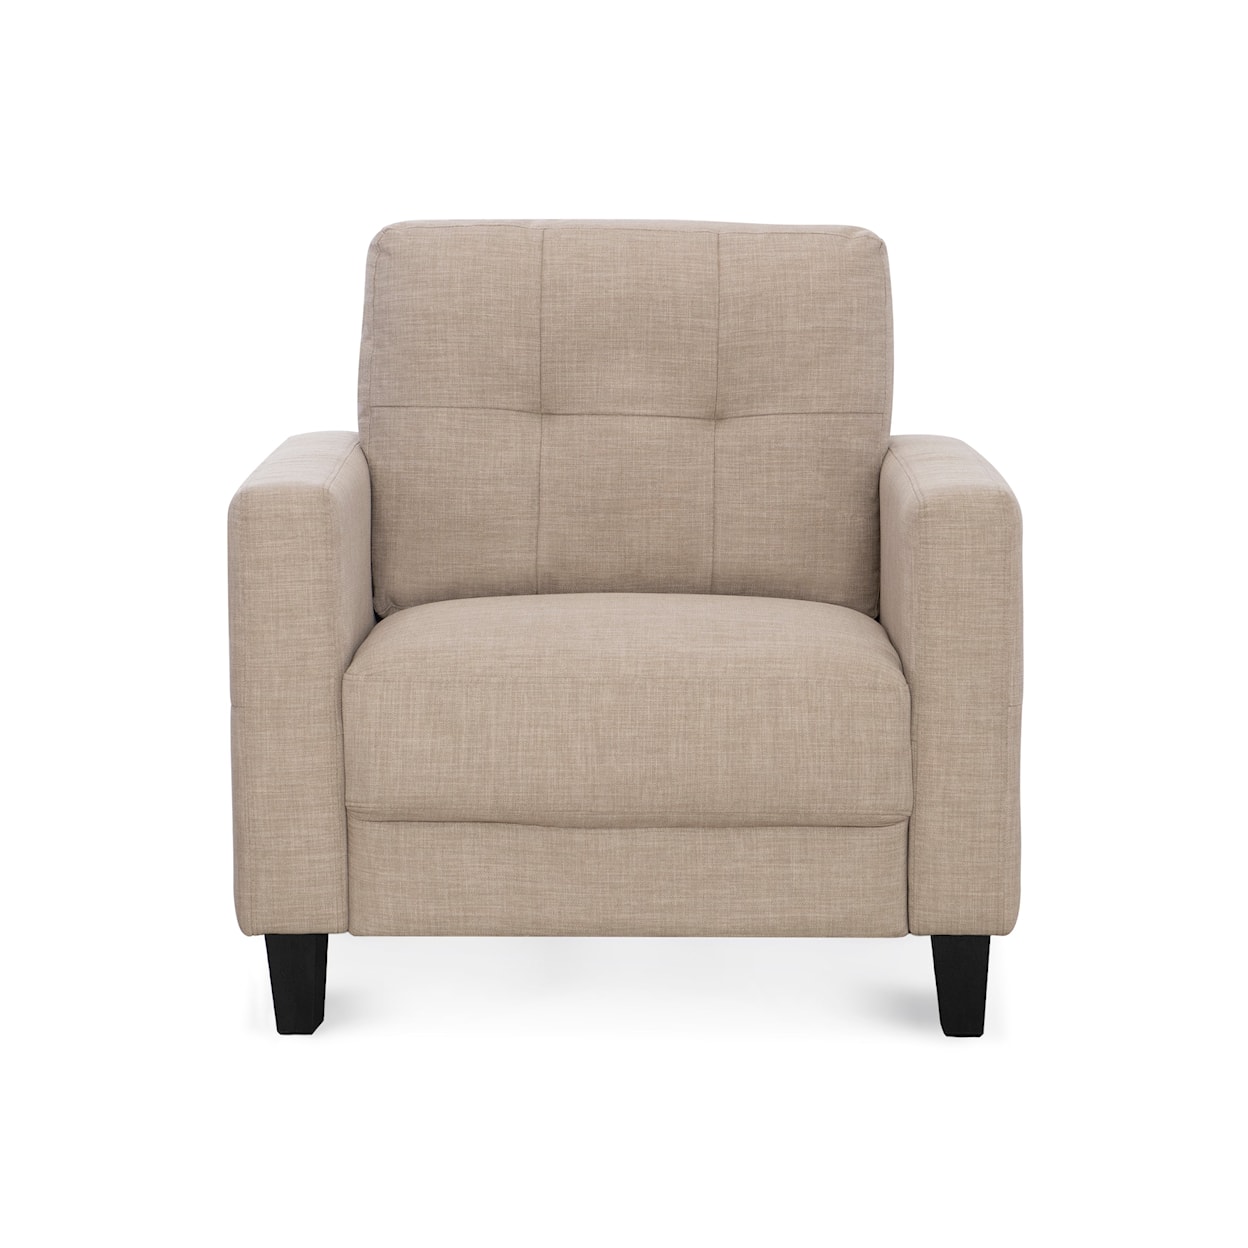 Home Furniture Outfitters Owen Chair